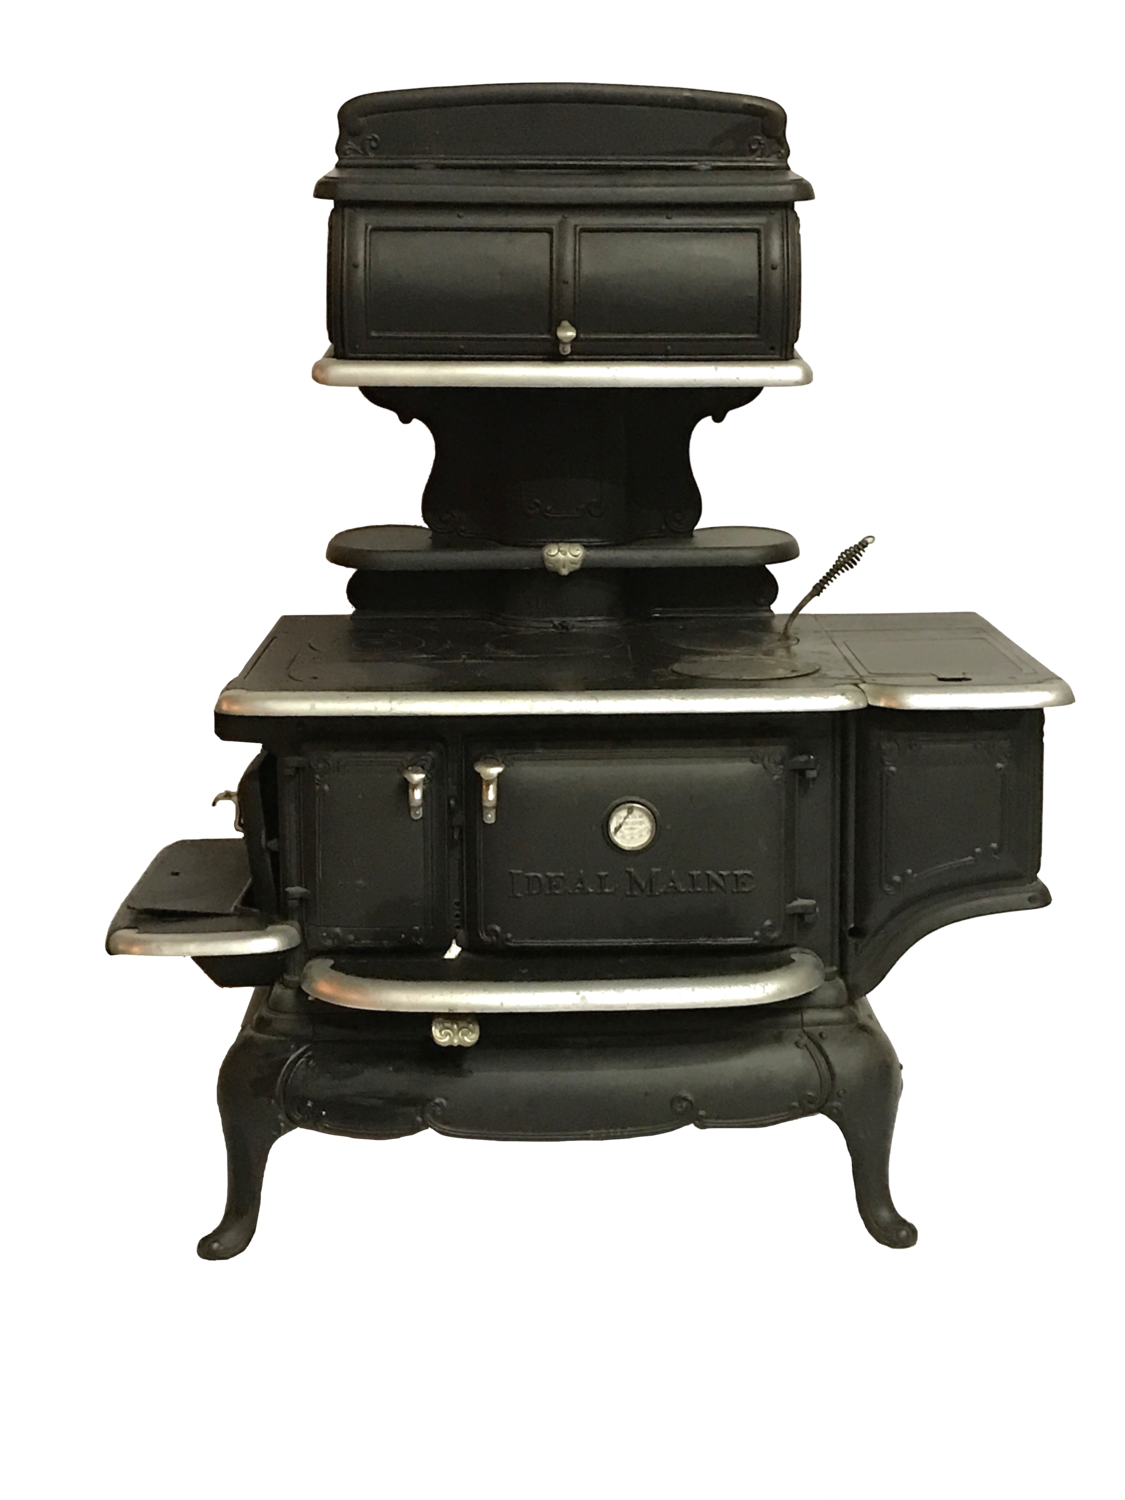 Antique Kitchen Stove Download Free PNG